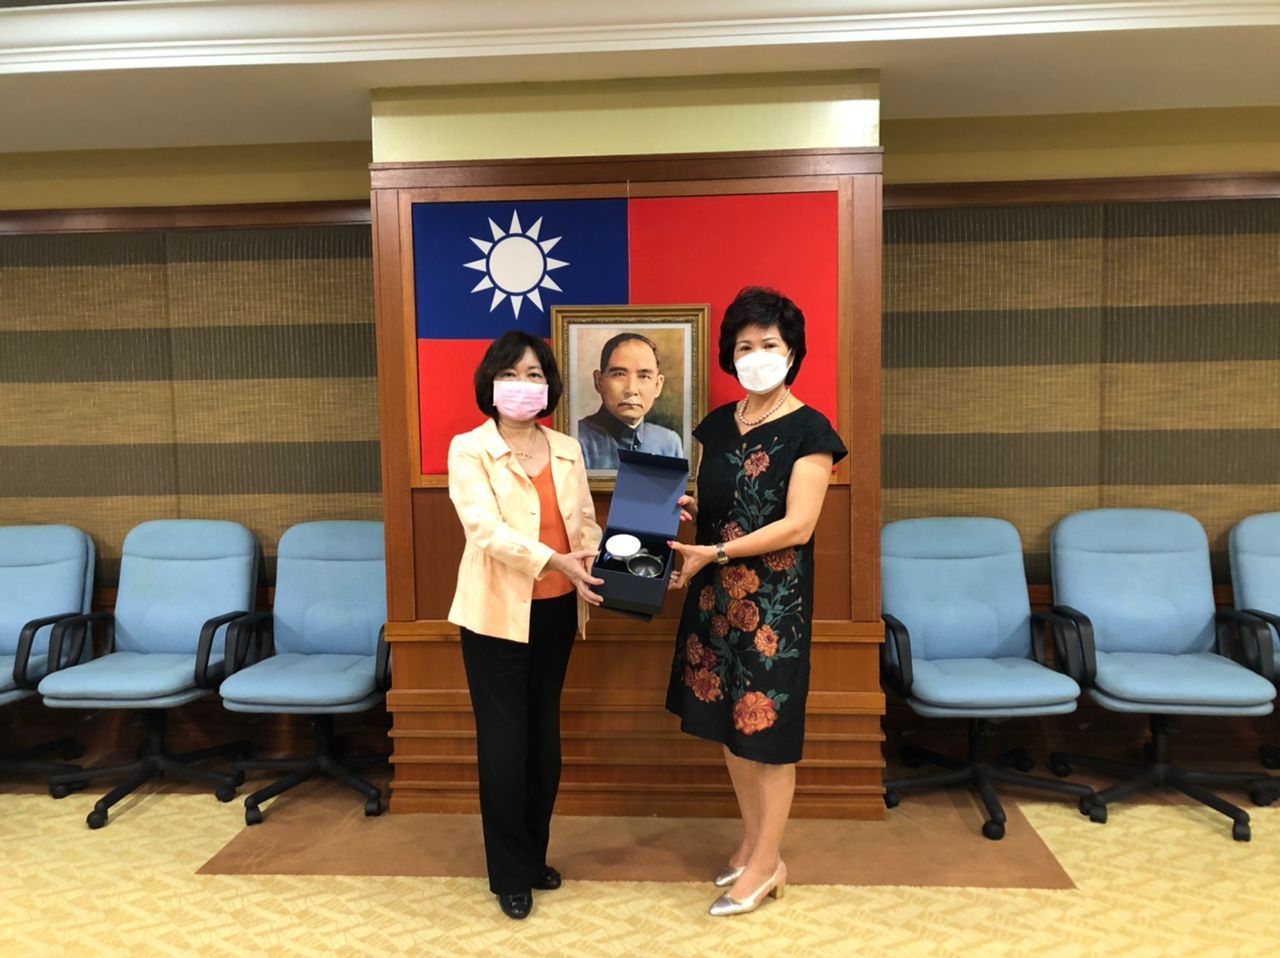 Representative Anne Hung presents a gift to Dato Cheng Mei Man.

